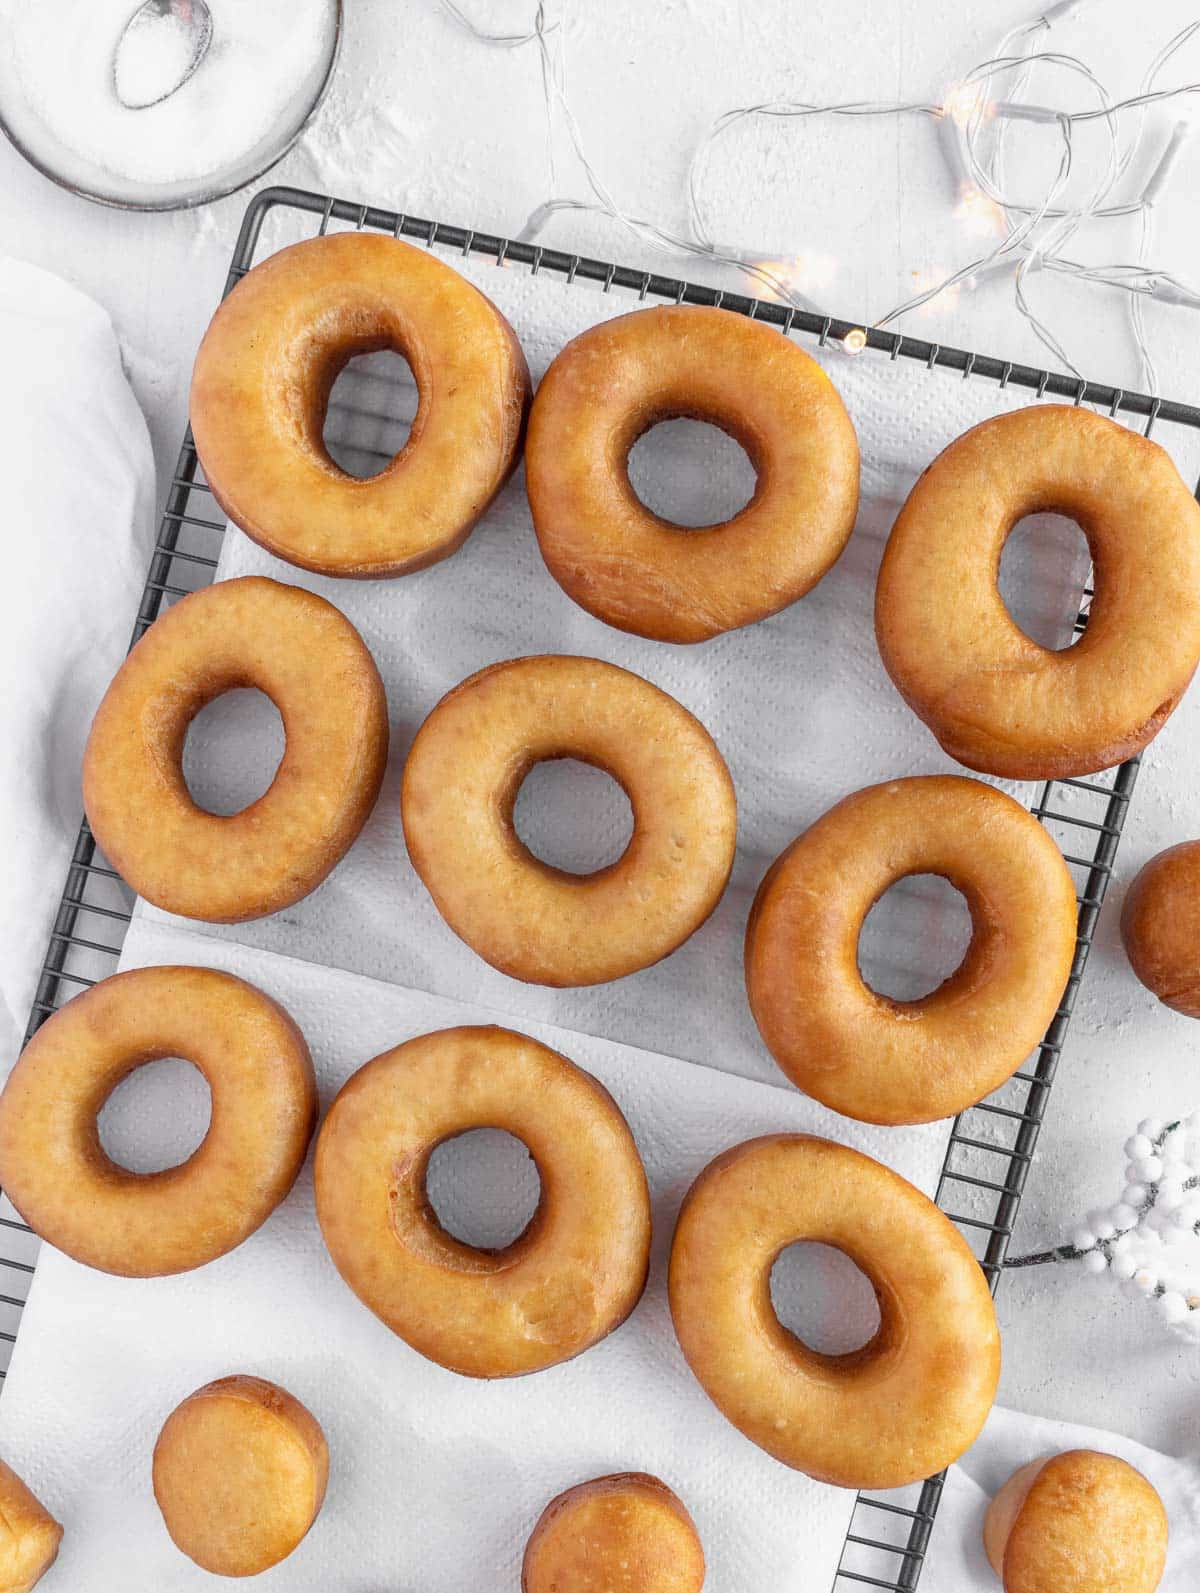 deep-fried vegan donuts on a cooling rack